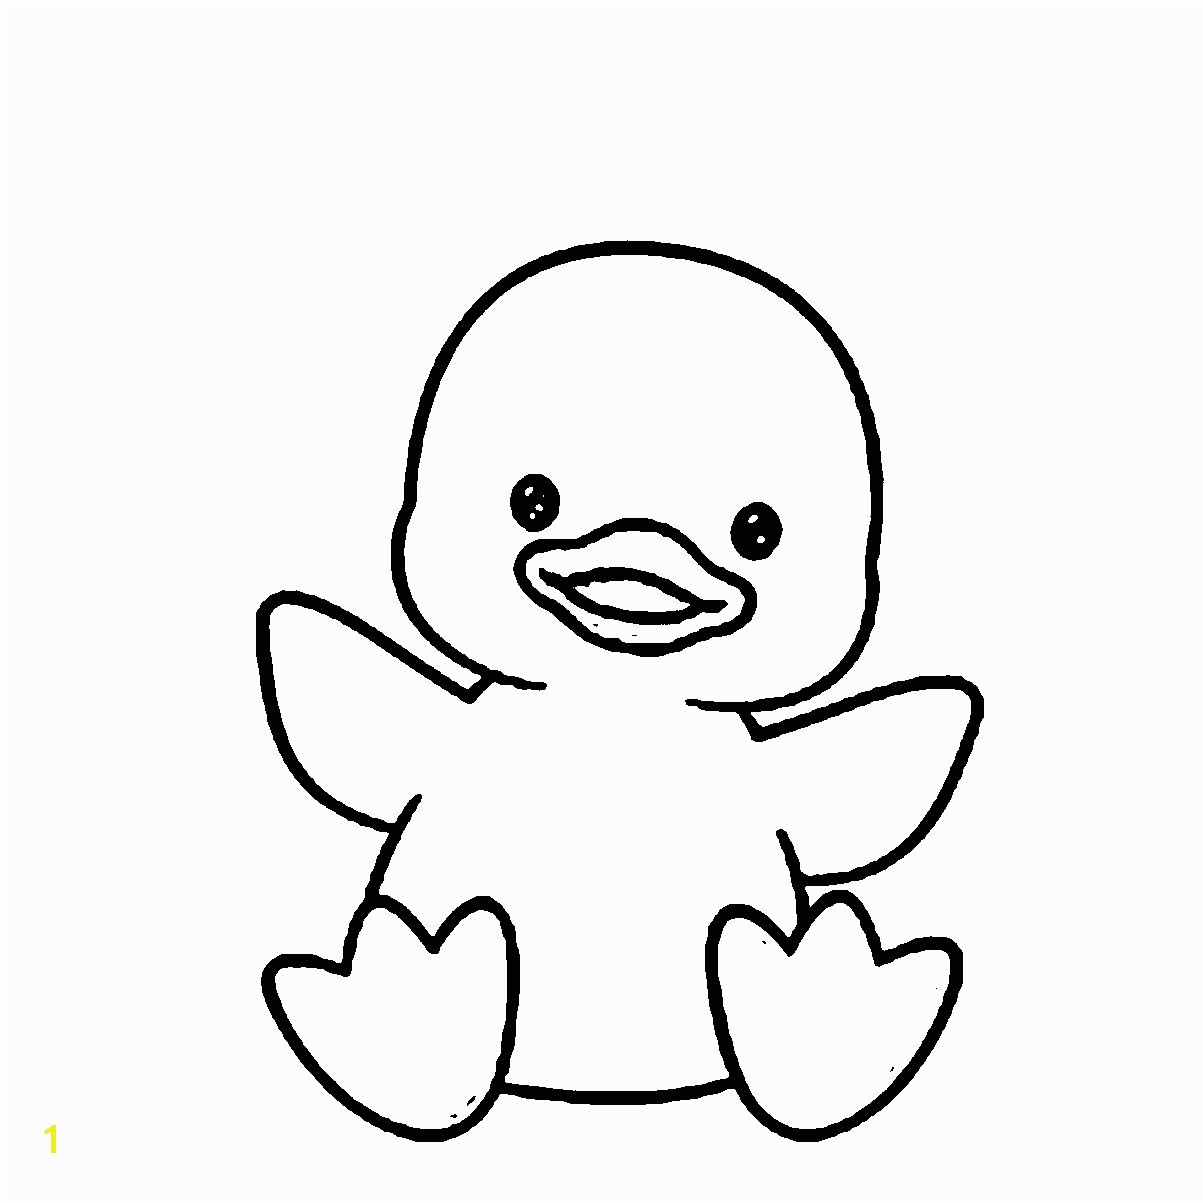 Duck Coloring Pages for toddlers Duck Coloring Pages Coloring Pages Pinterest